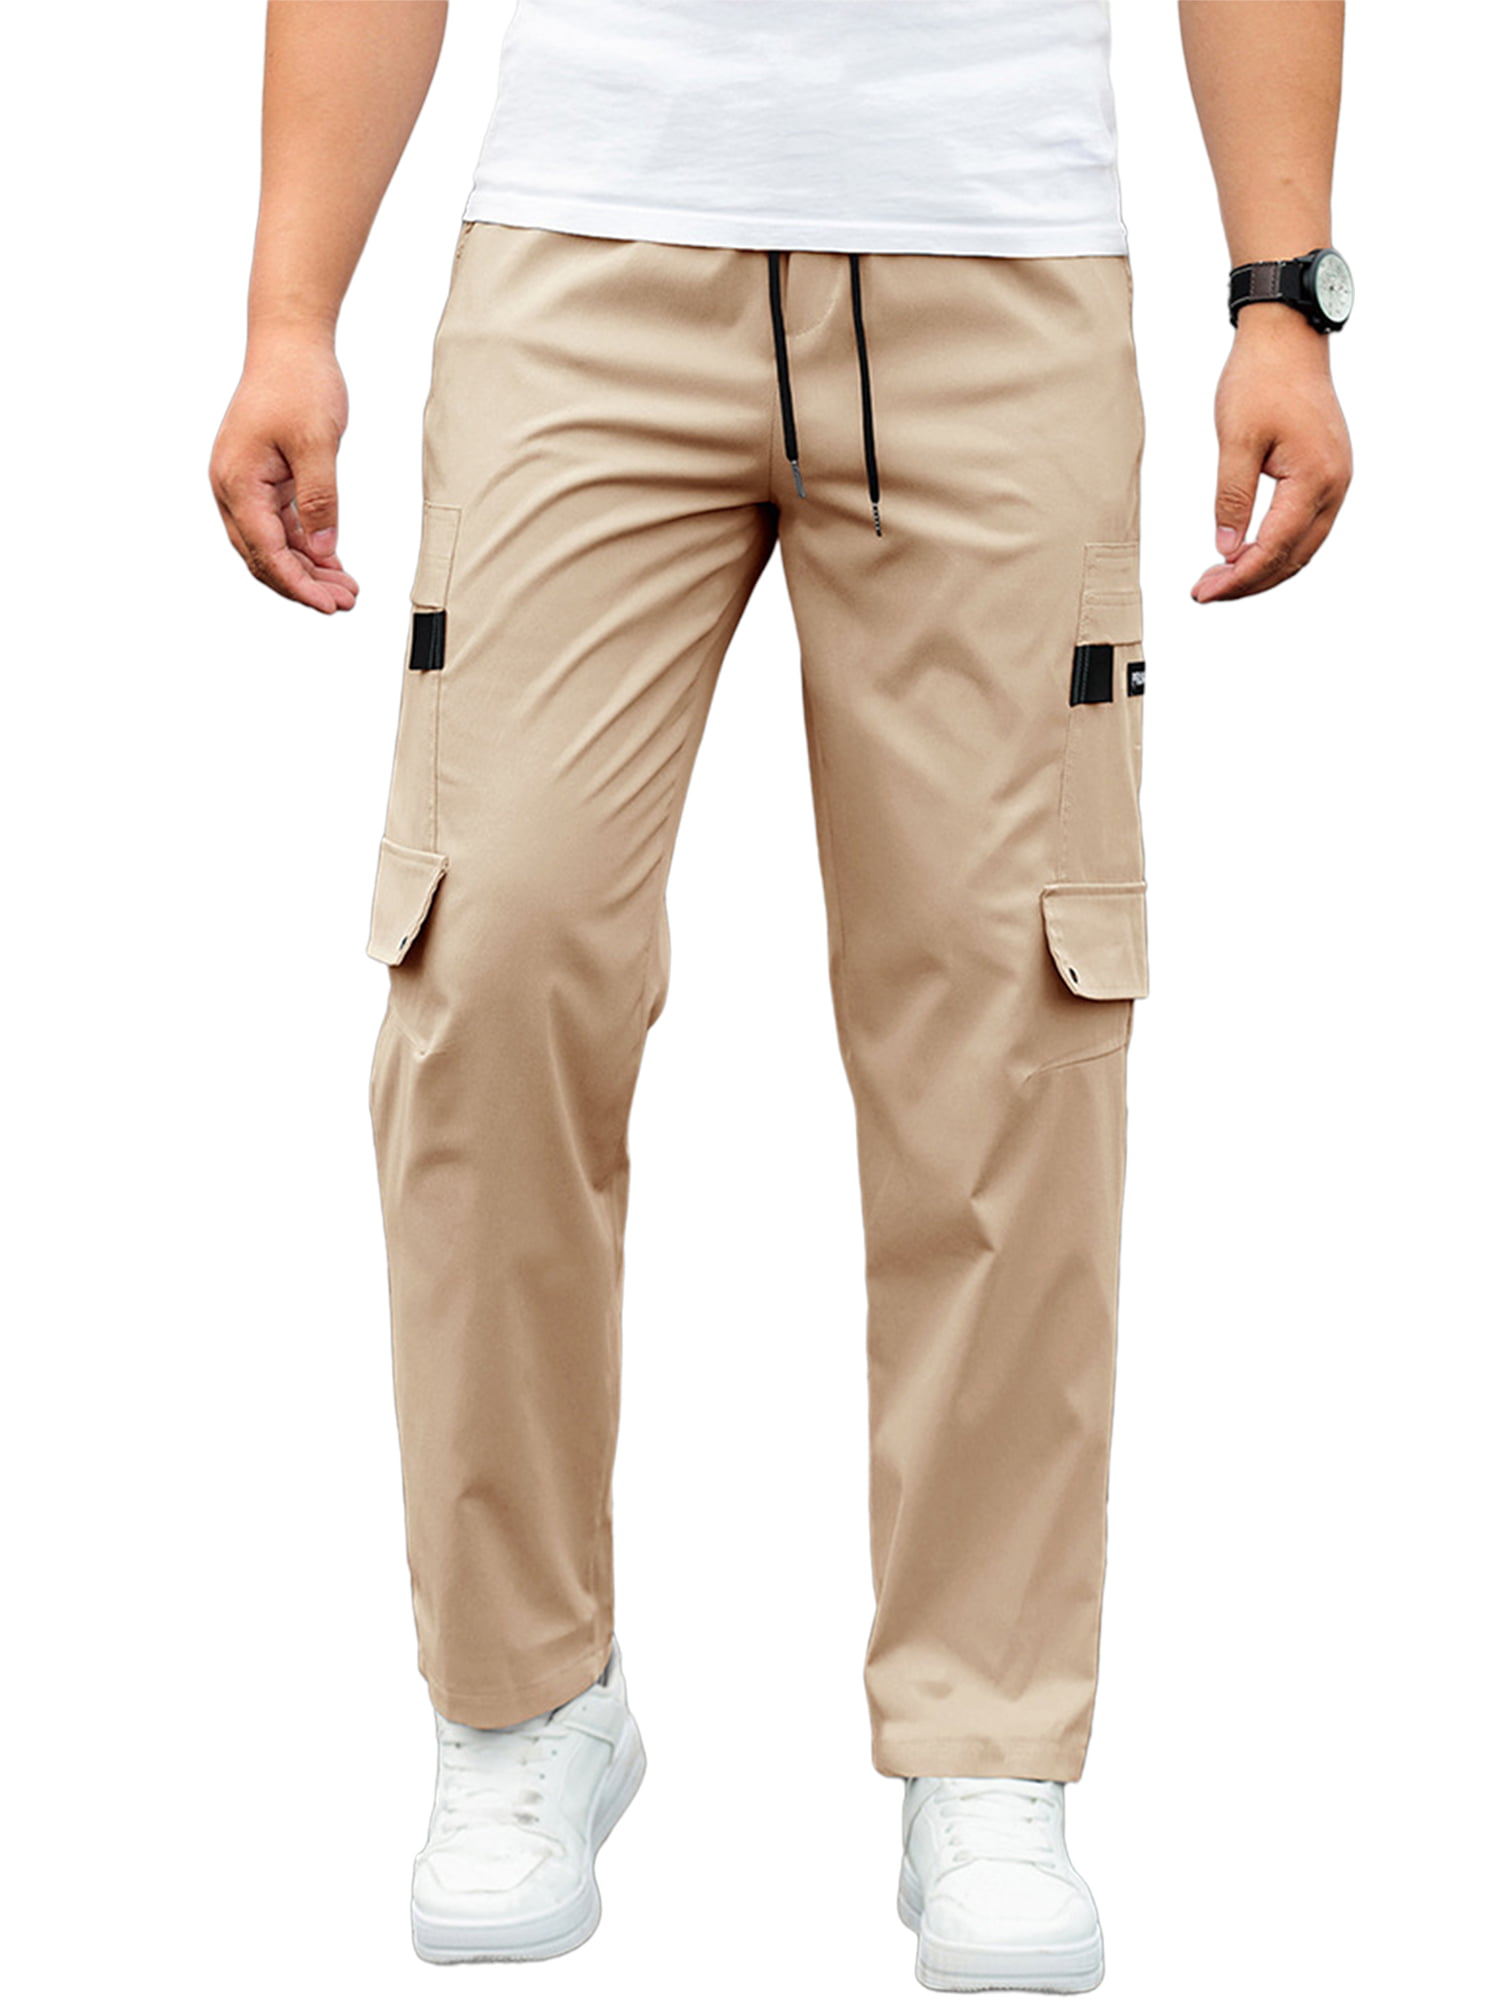 C.P. Company Comfort Twill Stretch Loose Fitted Cargo Pant - DeeCee style